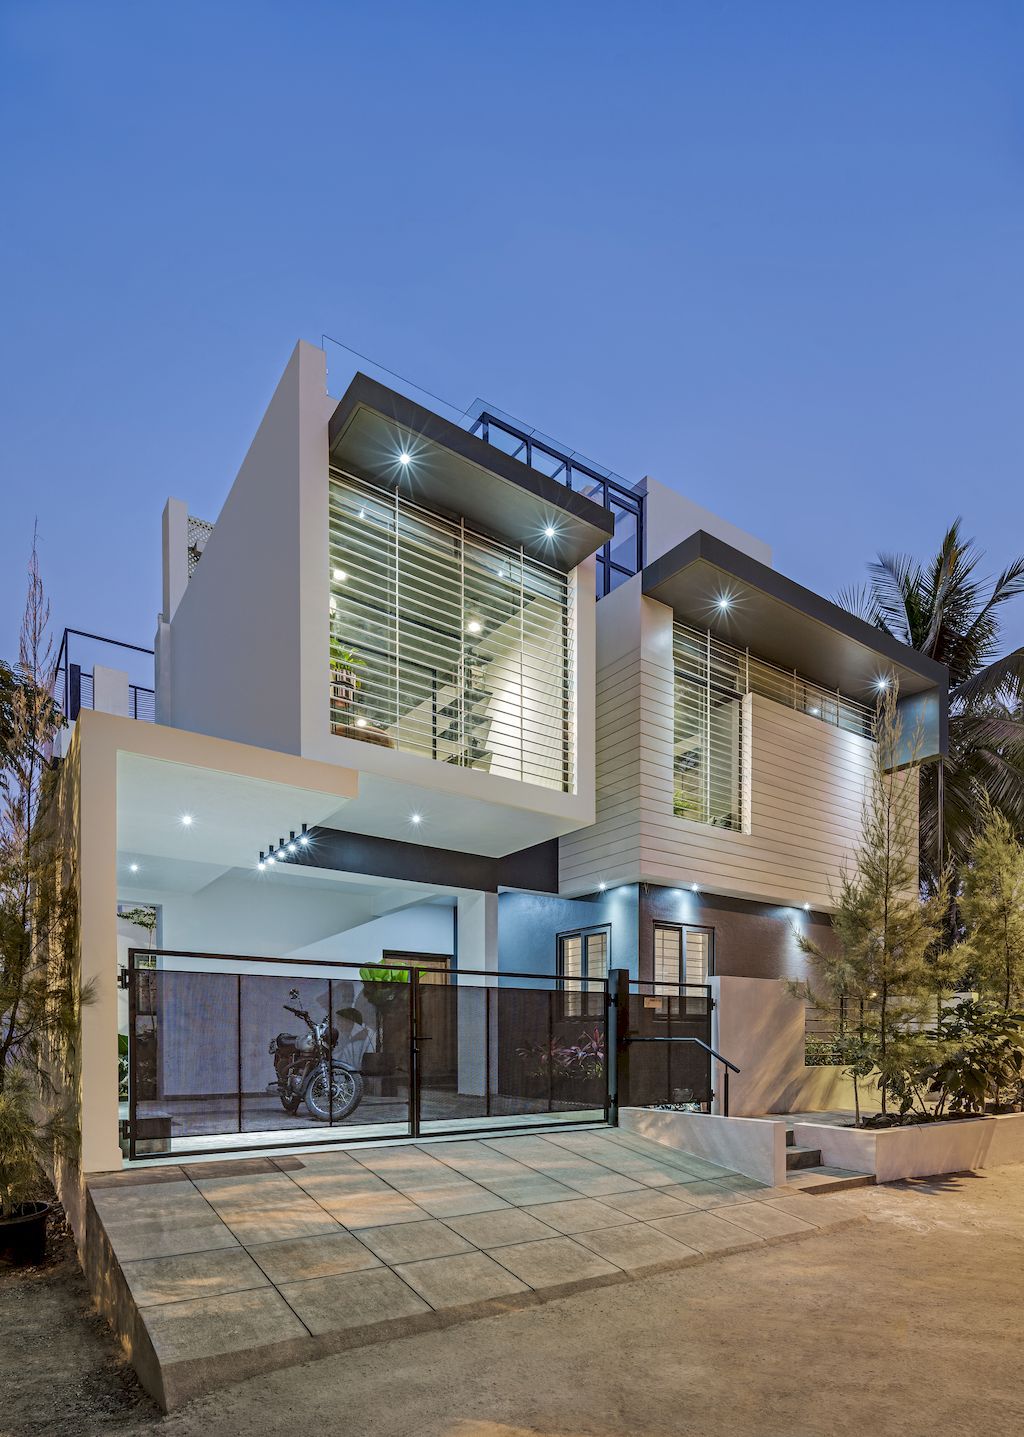 The Elemental, an Intimate 4 Bedroom Tropical Home by Ashwin Architects